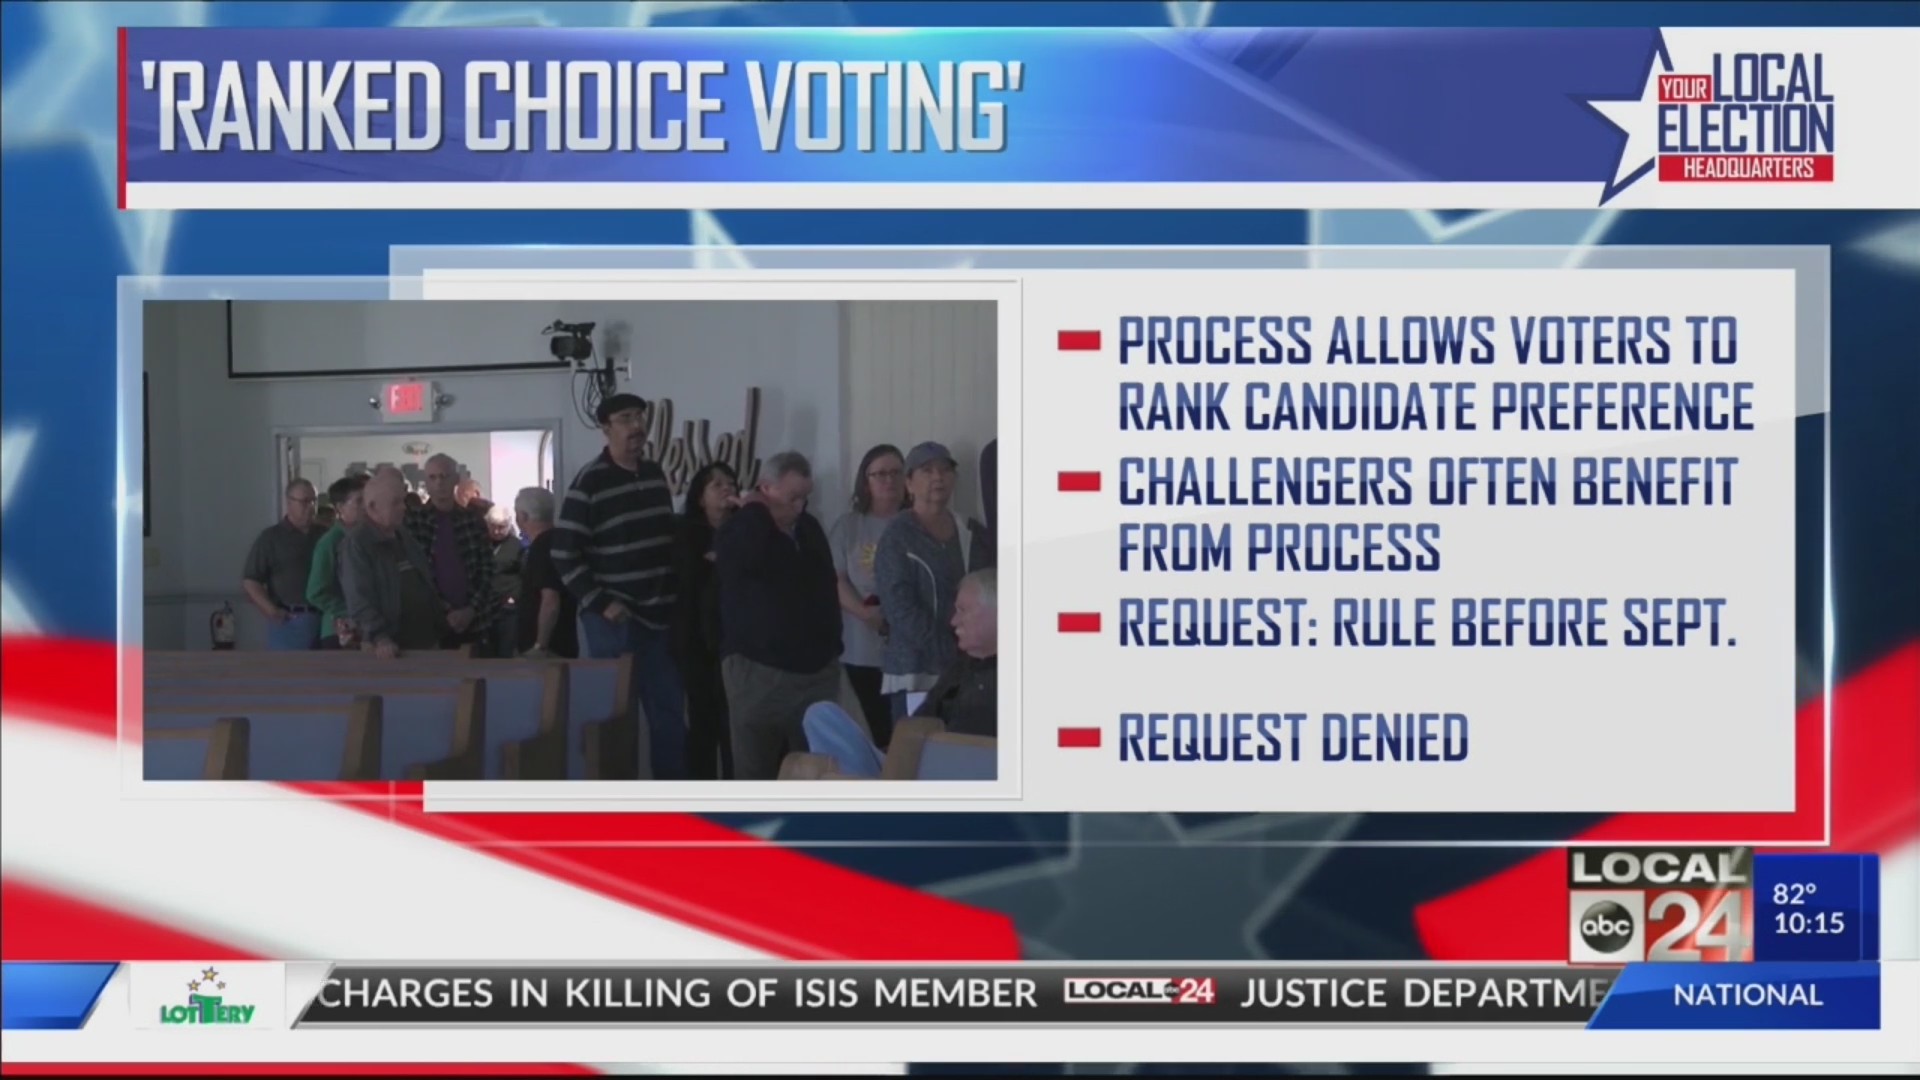 Ranked choice voting, also known as instant runoff voting, will not occur in next election